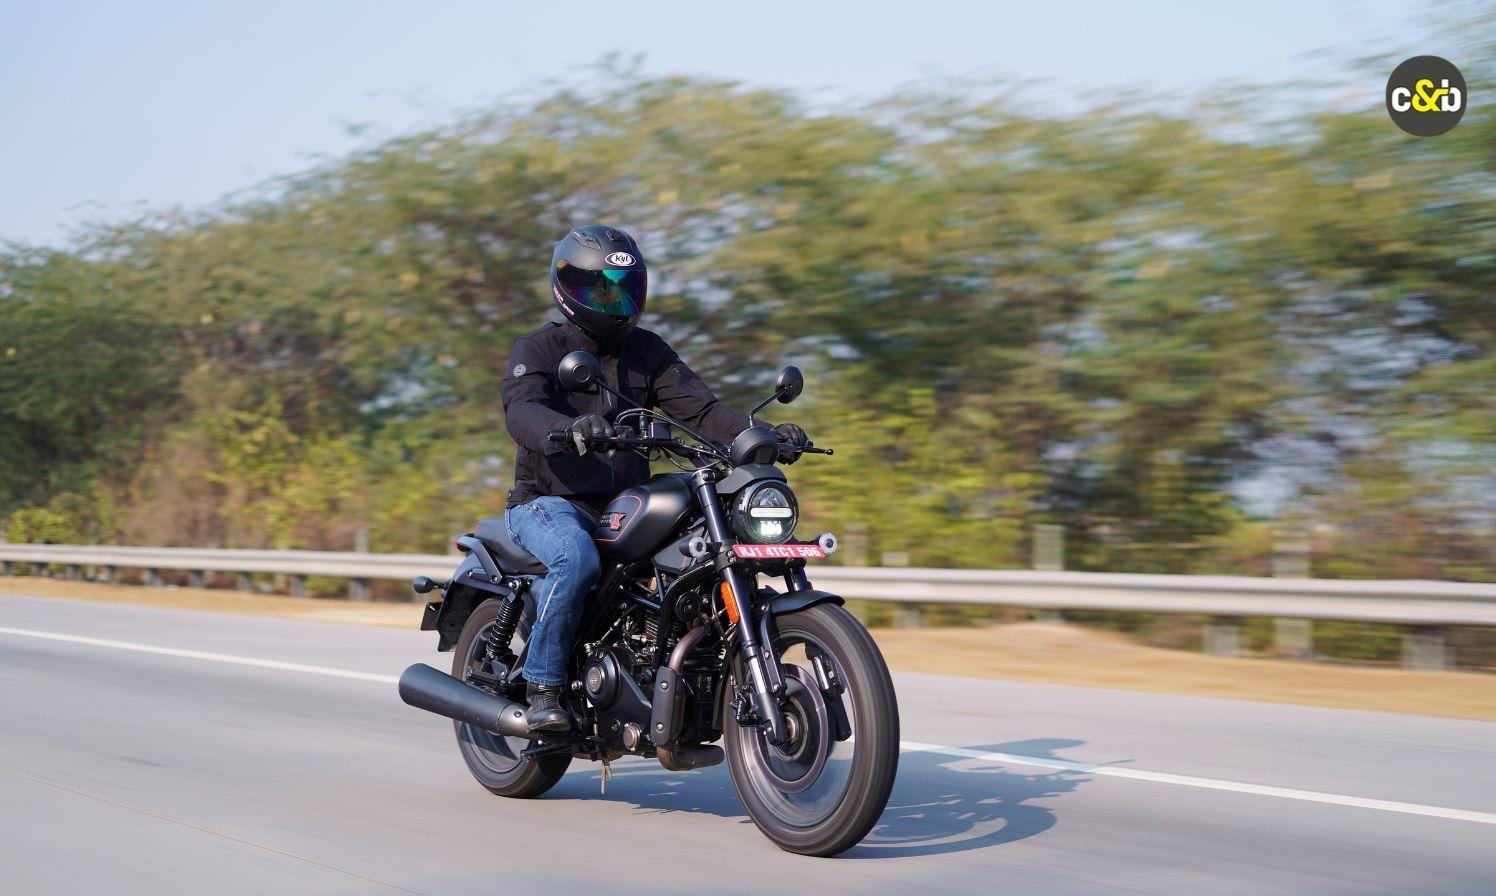 We ride the Harley-Davidson X440 on everyday roads, in the city and out on the highway to get a sense of what this made-in-India, single-cylinder Harley-Davidson offers. And the results are a pleasant surprise!